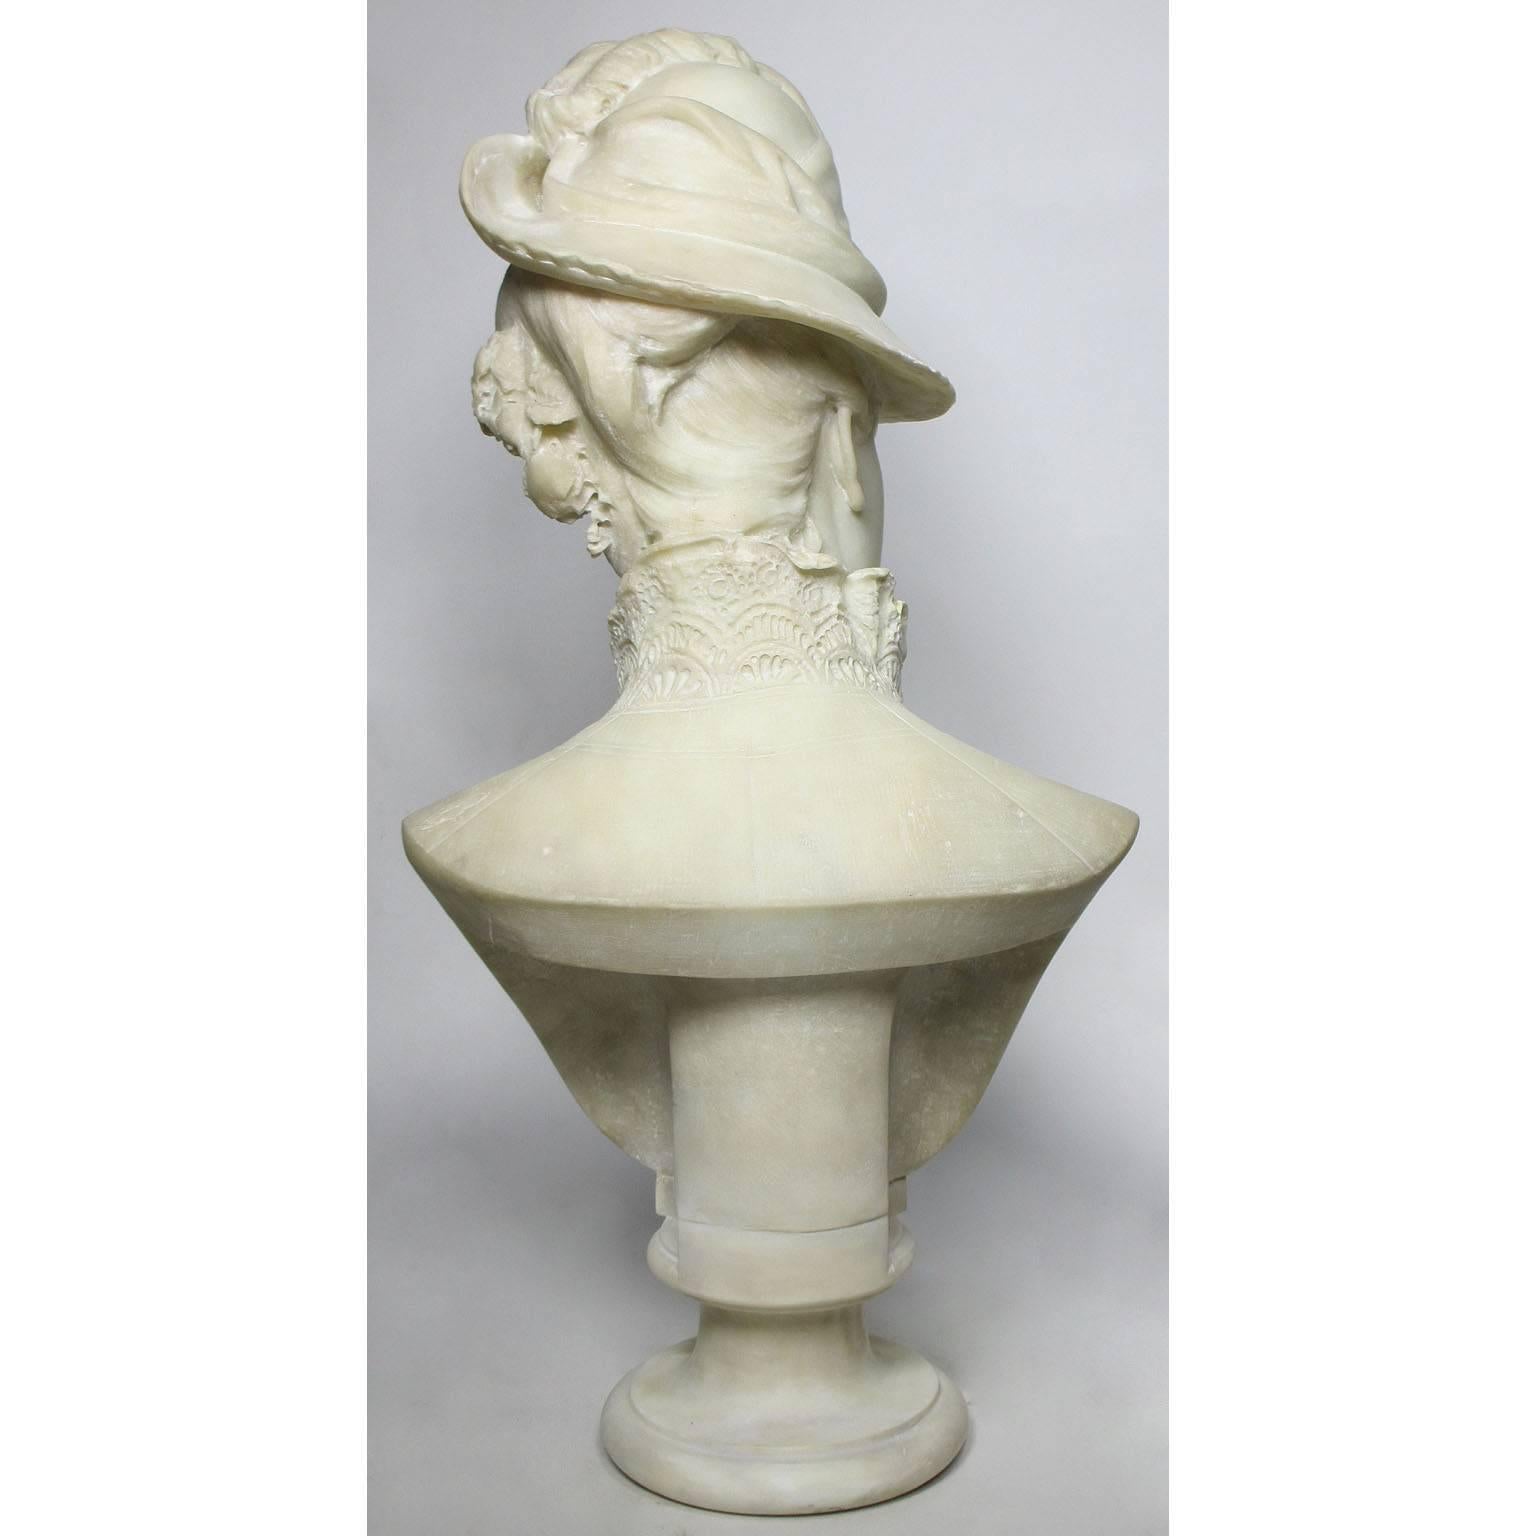 Fine Italian 19th-20th Century Lifesize Carved Marble Bust of a Posing Lady For Sale 1